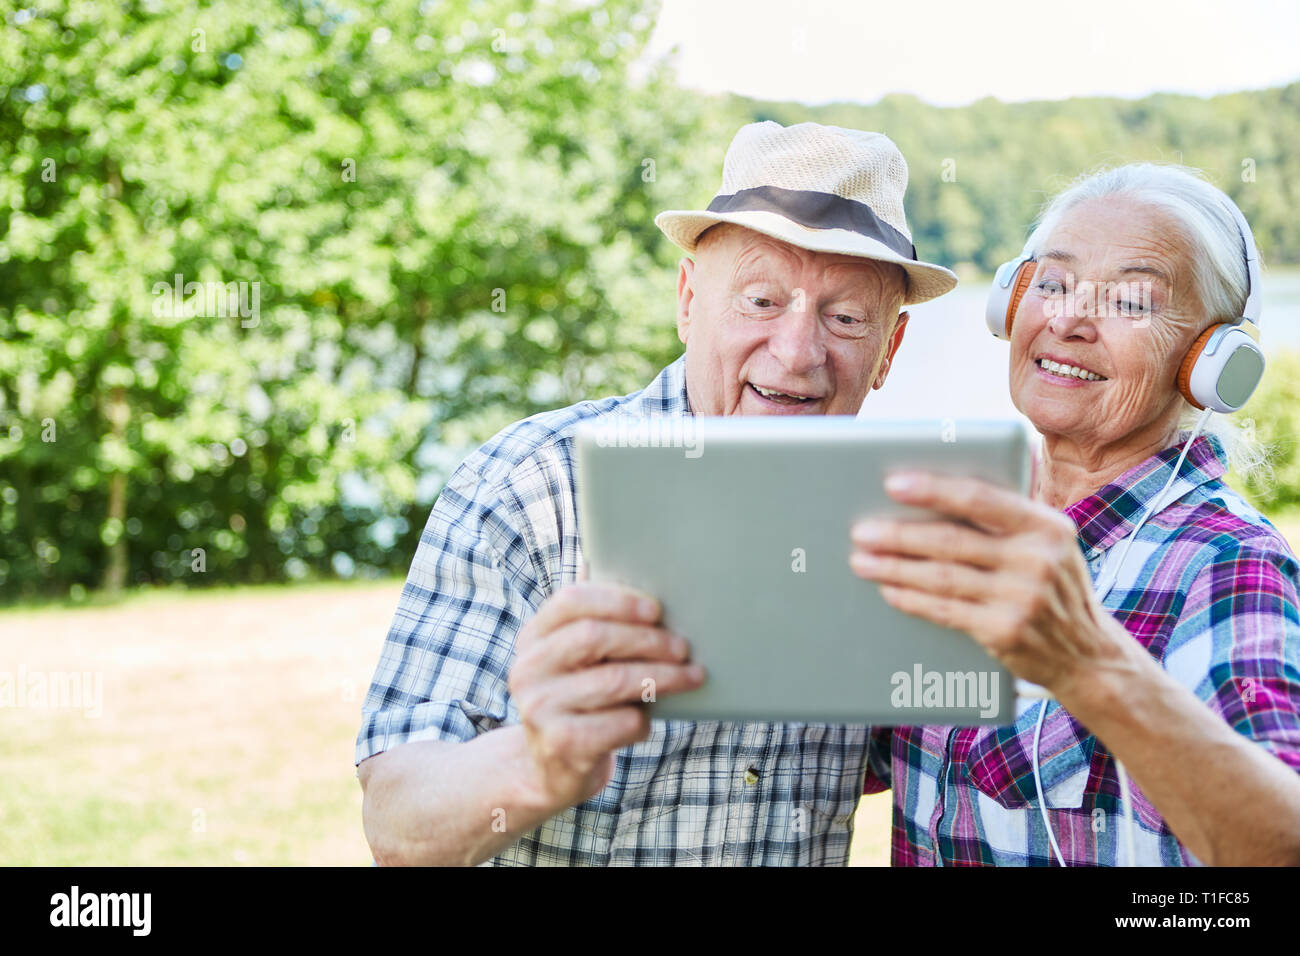 Senior couple on a nature trip with tablet computer and headphones Stock Photo